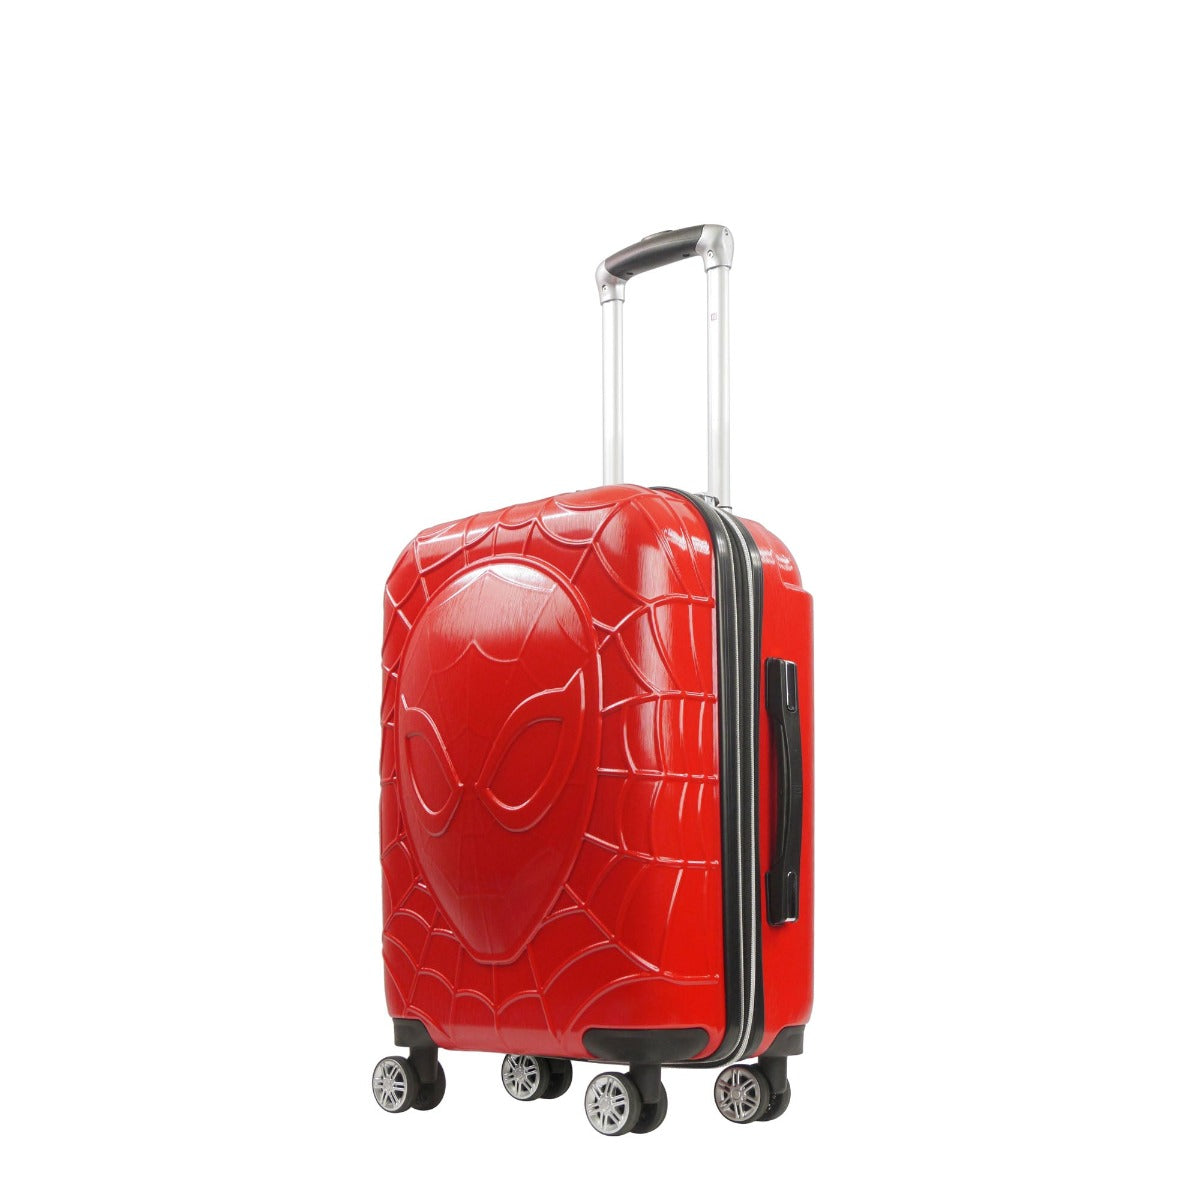 Spiderman Carry-on Hard-sided Spinner Suitcase 23" Luggage Red